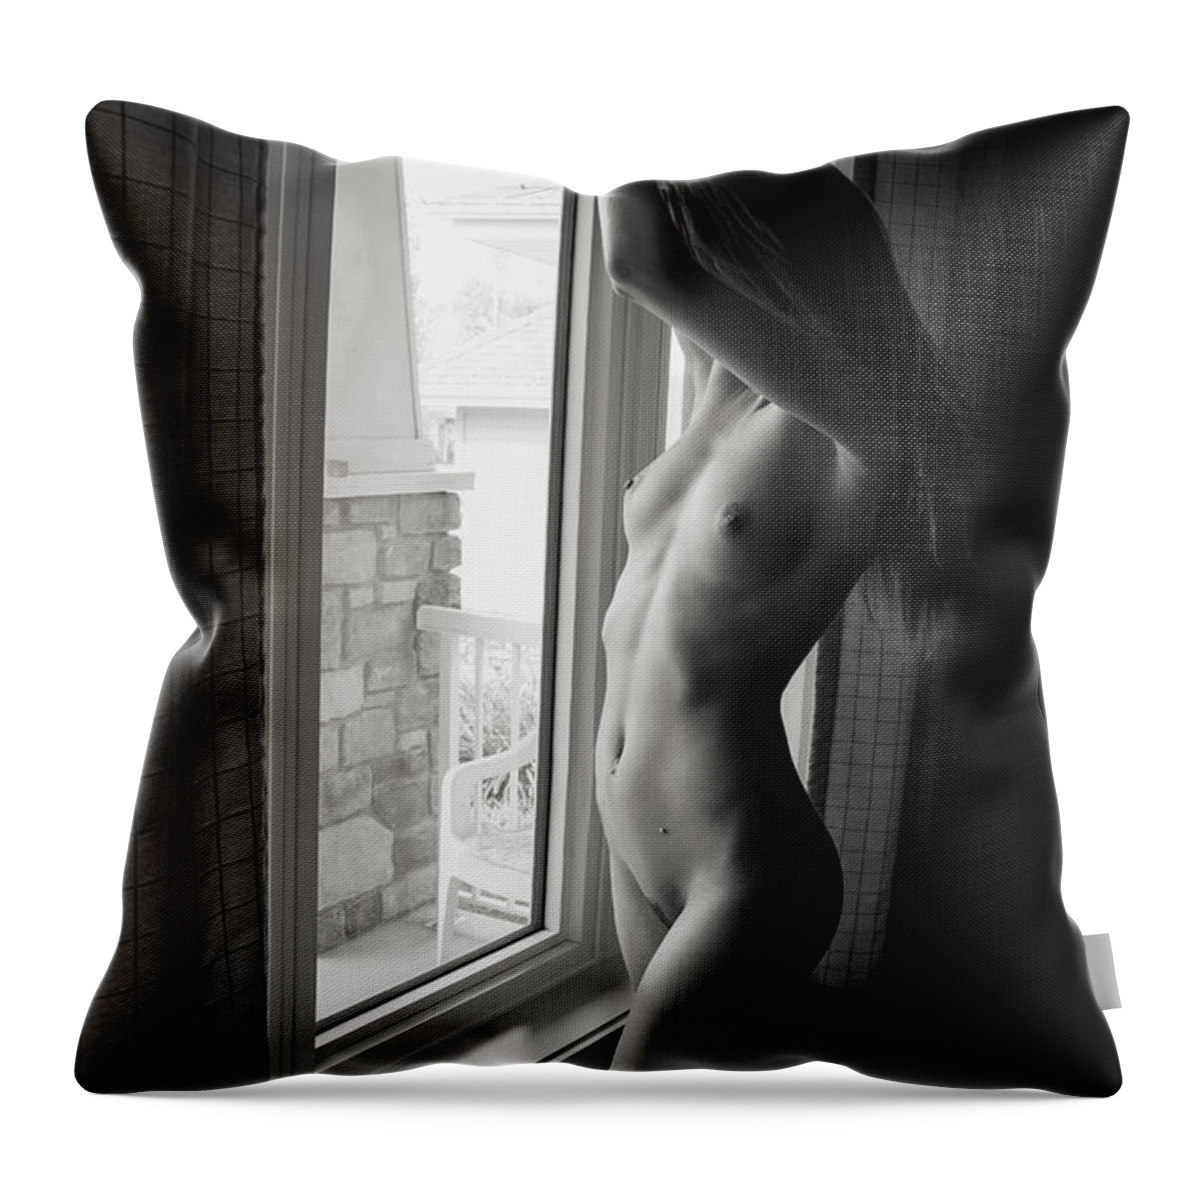 Blue Muse Fine Art. Bluemusefineart.com Throw Pillow featuring the photograph Day Dreaming by Blue Muse Fine Art